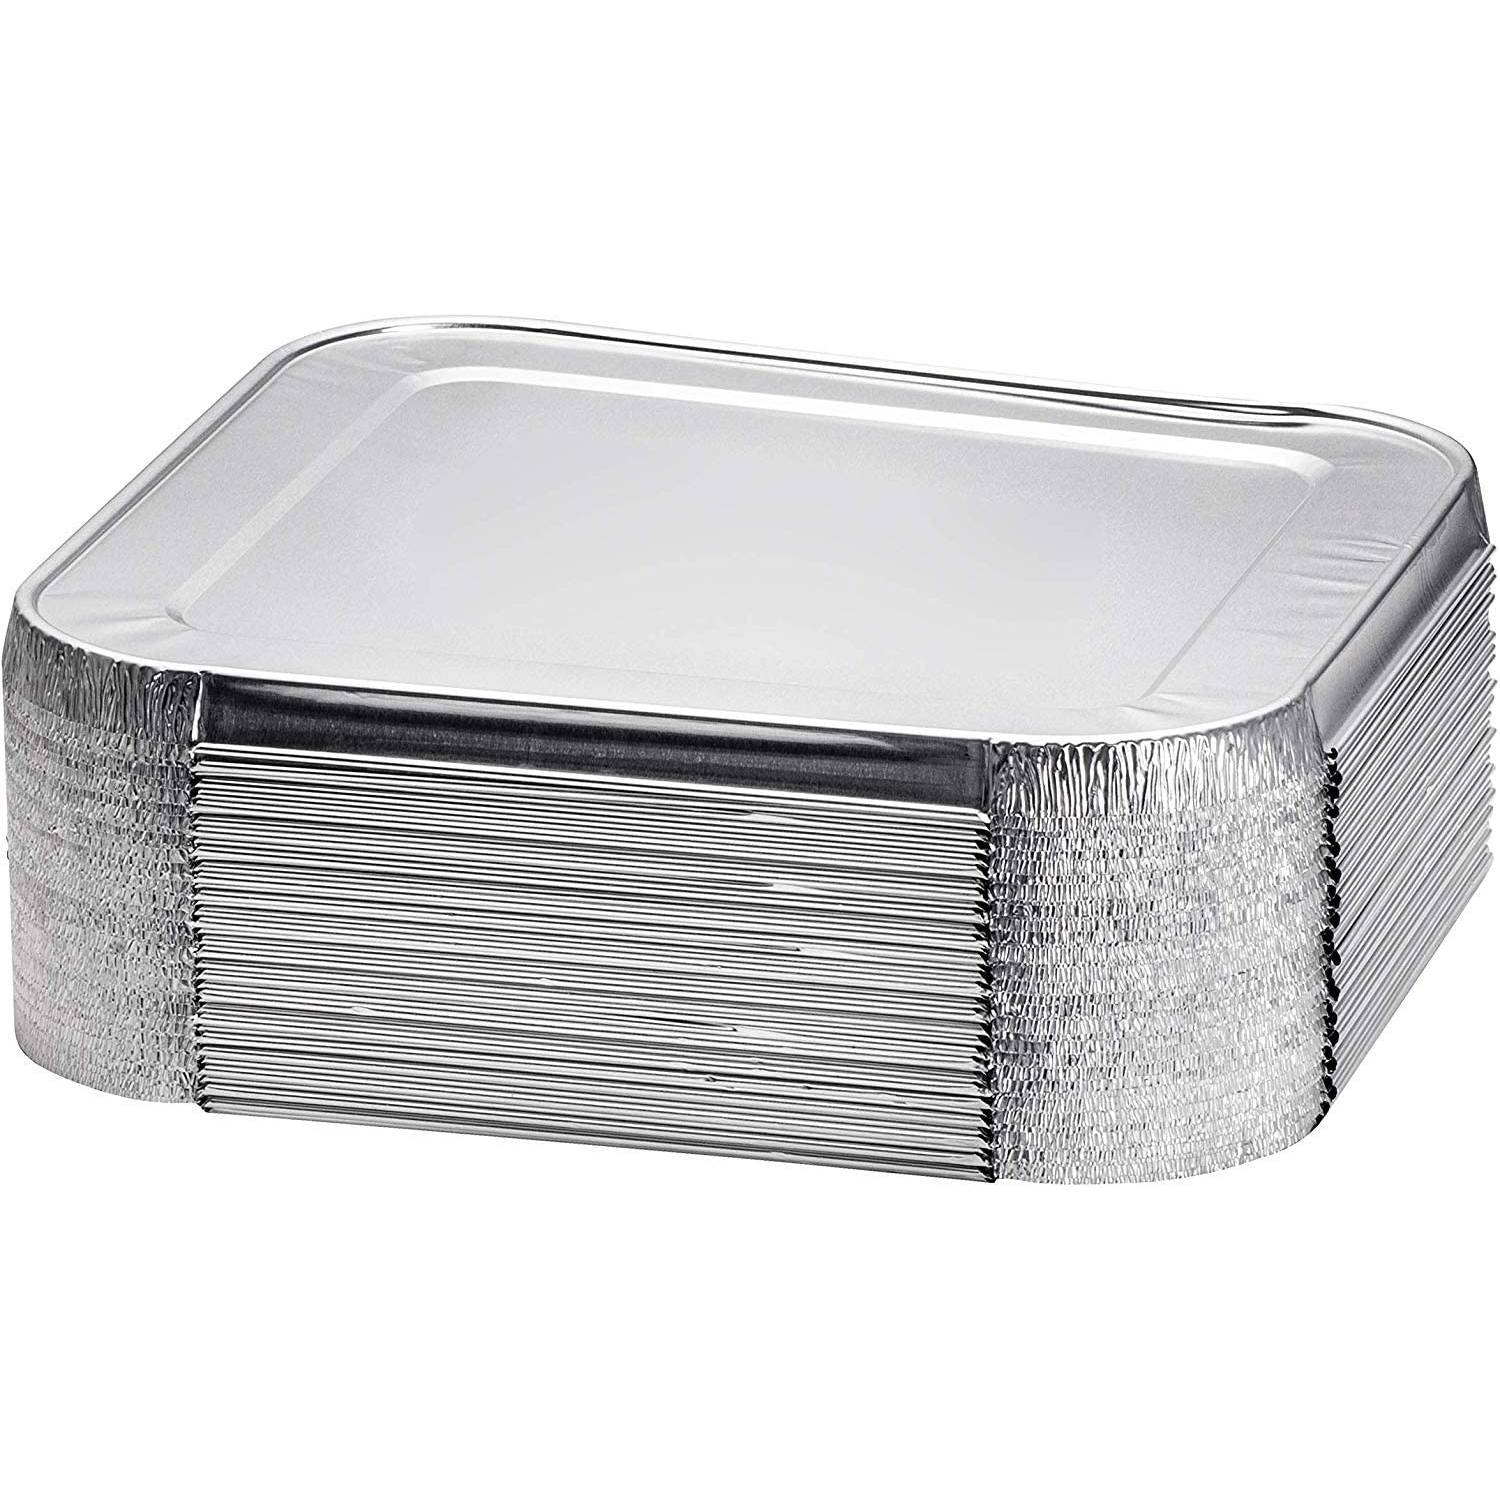 Case of Aluminum - 17" x 12½" x 3⅕" - Disposable - Rectangular - Large Lid for Rack Roaster | 100 ct. Disposable Nicole Collection   